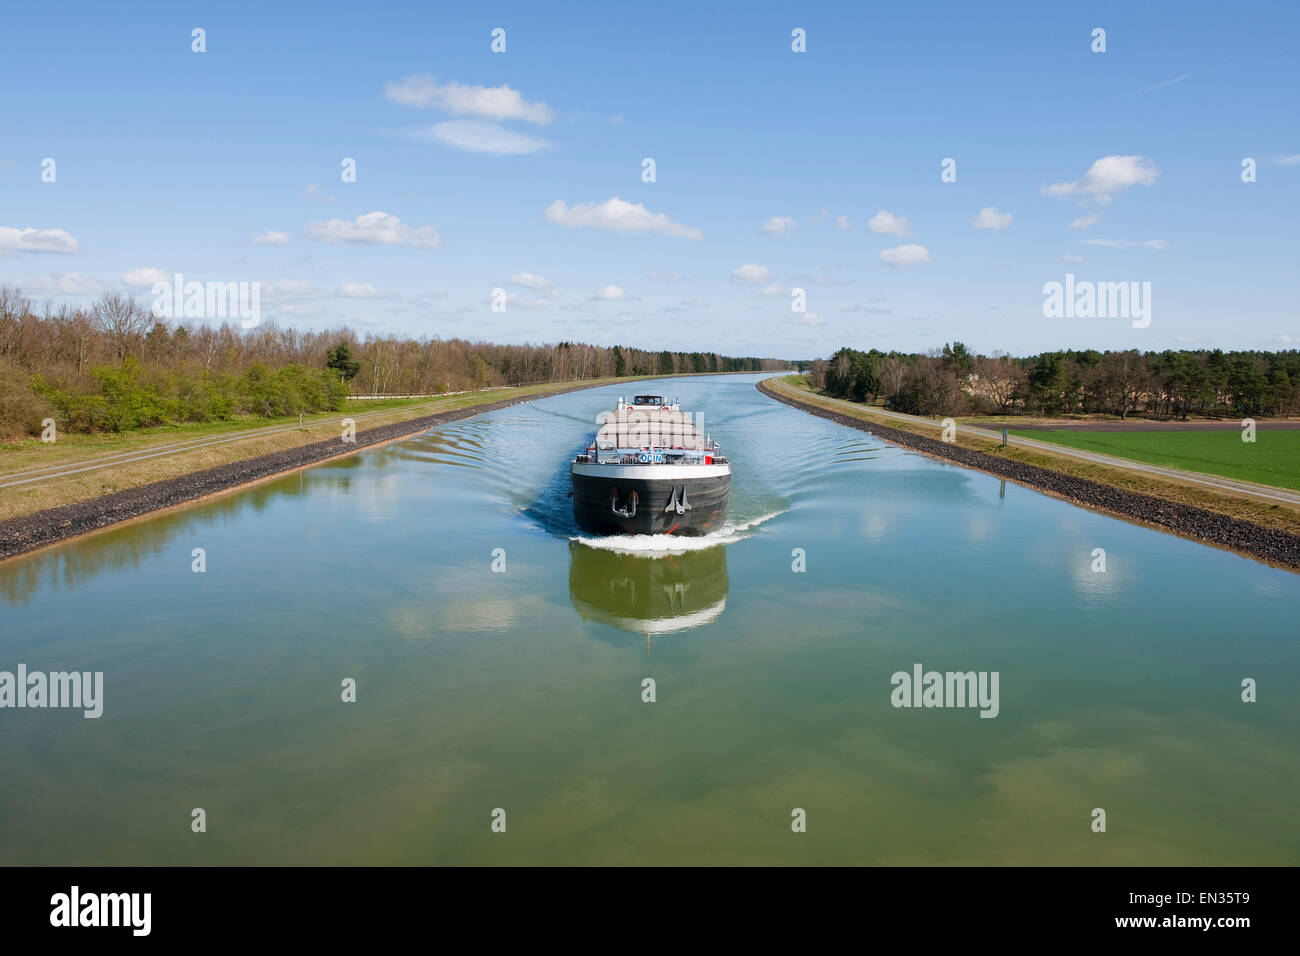 Cargo ship on the federal waterway Elbe Lateral Canal, near Stüde, Lower Saxony, Germany Stock Photo